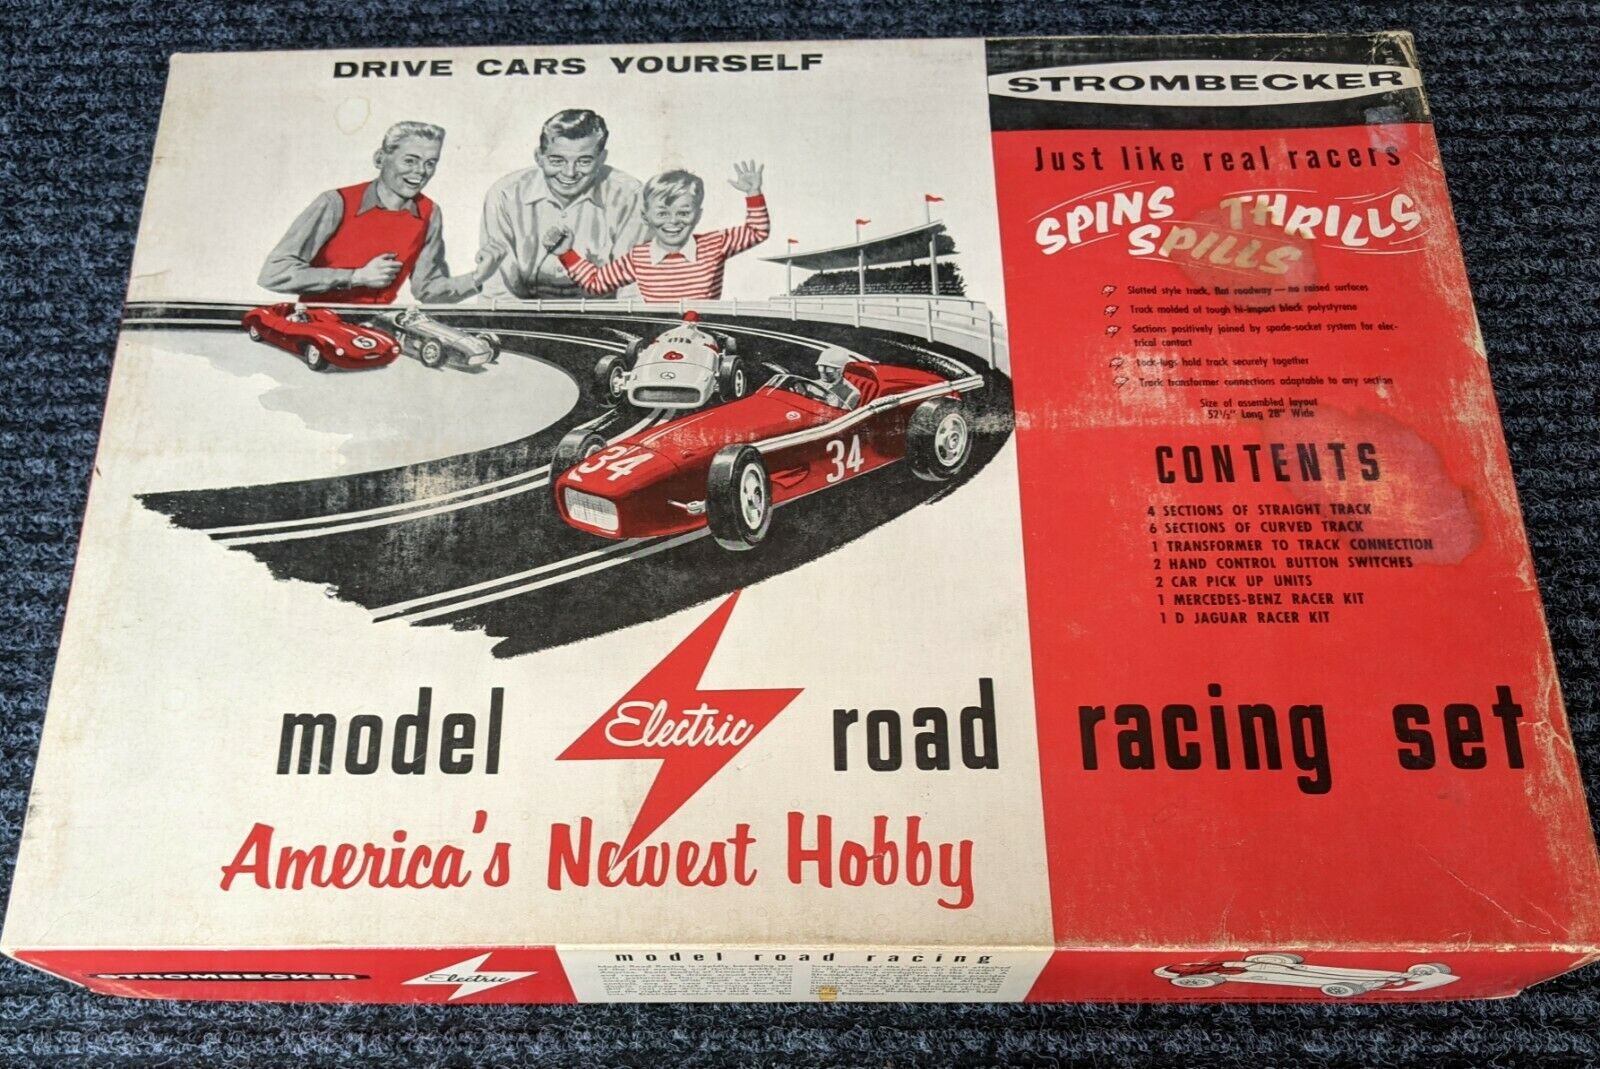 Strombecker 1/32nd Scale Slot Car Race Set - In Box-vintage Toy 1959